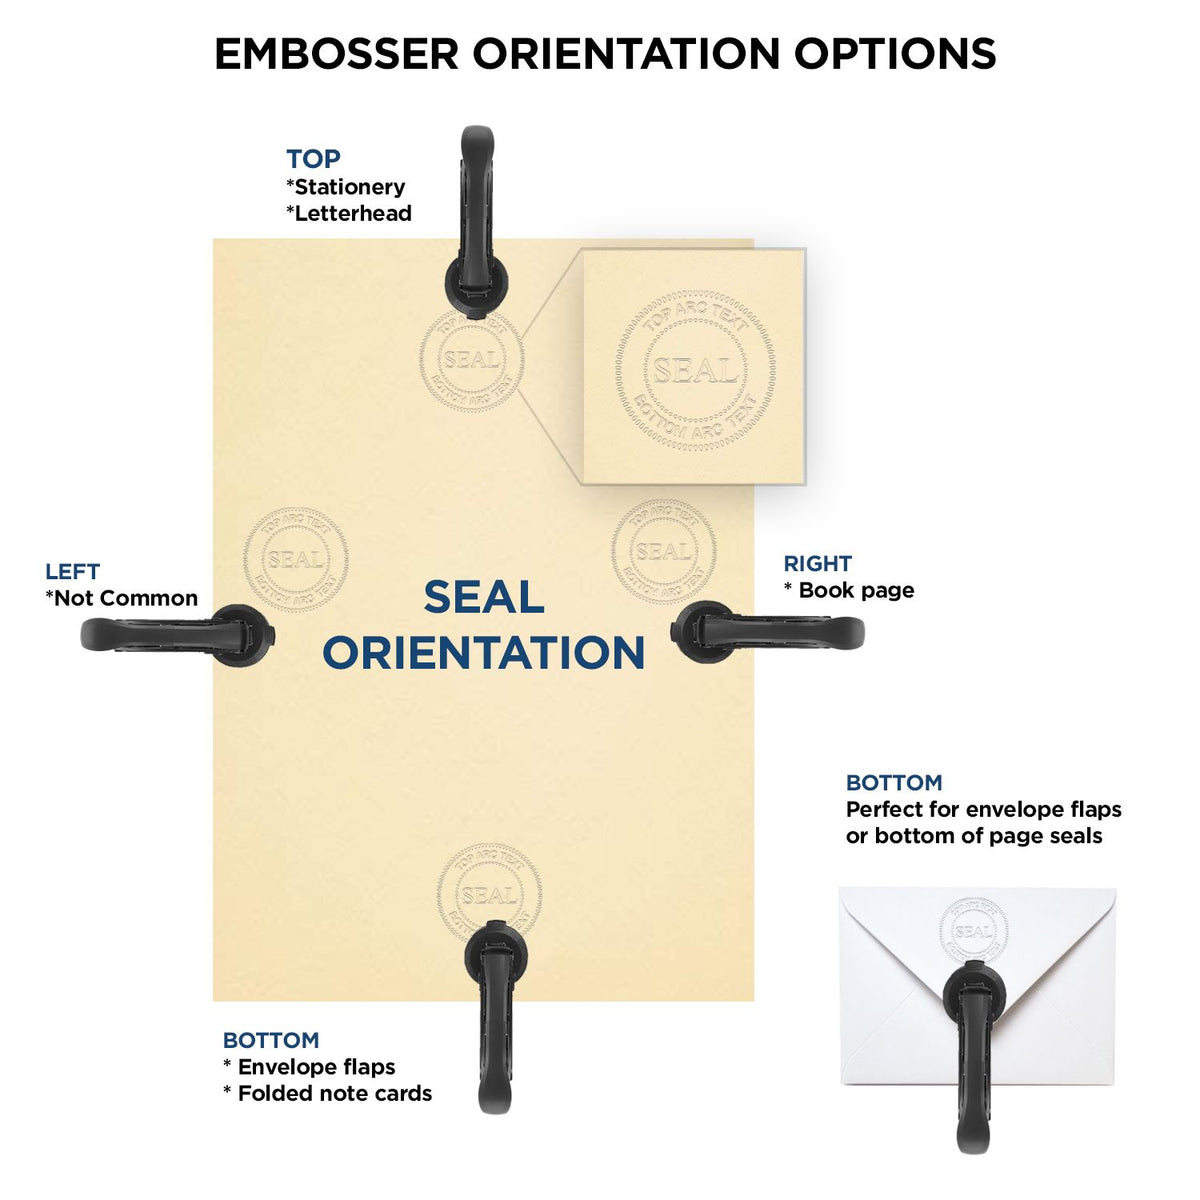 An infographic for the State of Wisconsin Extended Long Reach Geologist Seal showing embosser orientation, this is showing examples of a top, bottom, right and left insert.